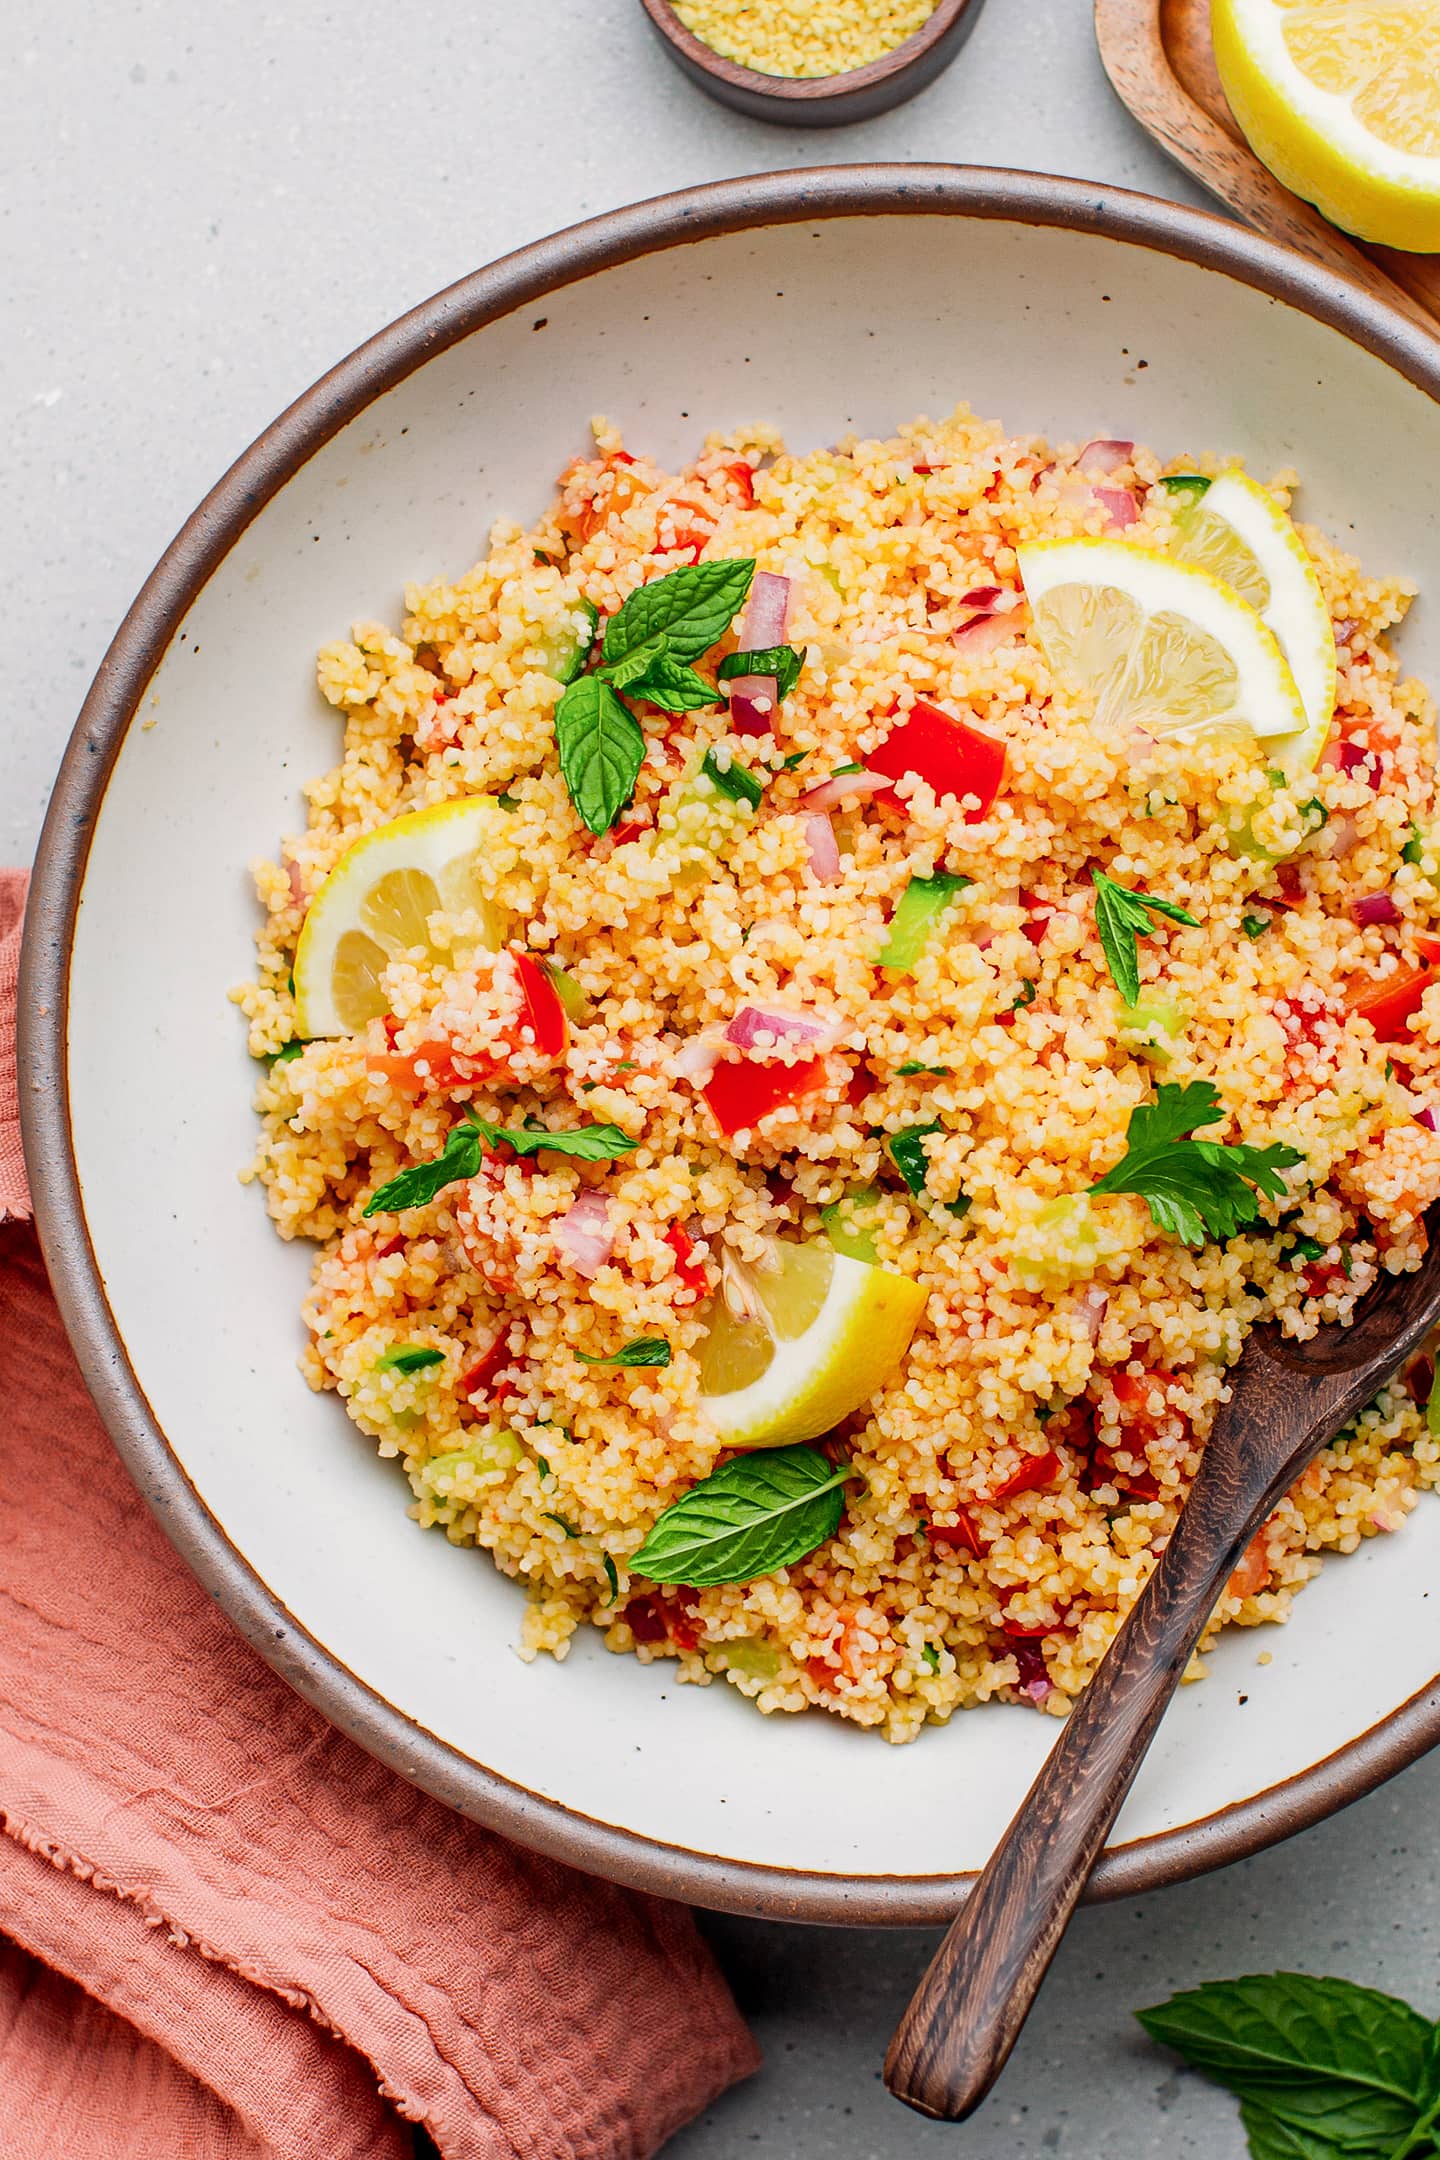 Couscous salad with fresh herbs in a bowl.